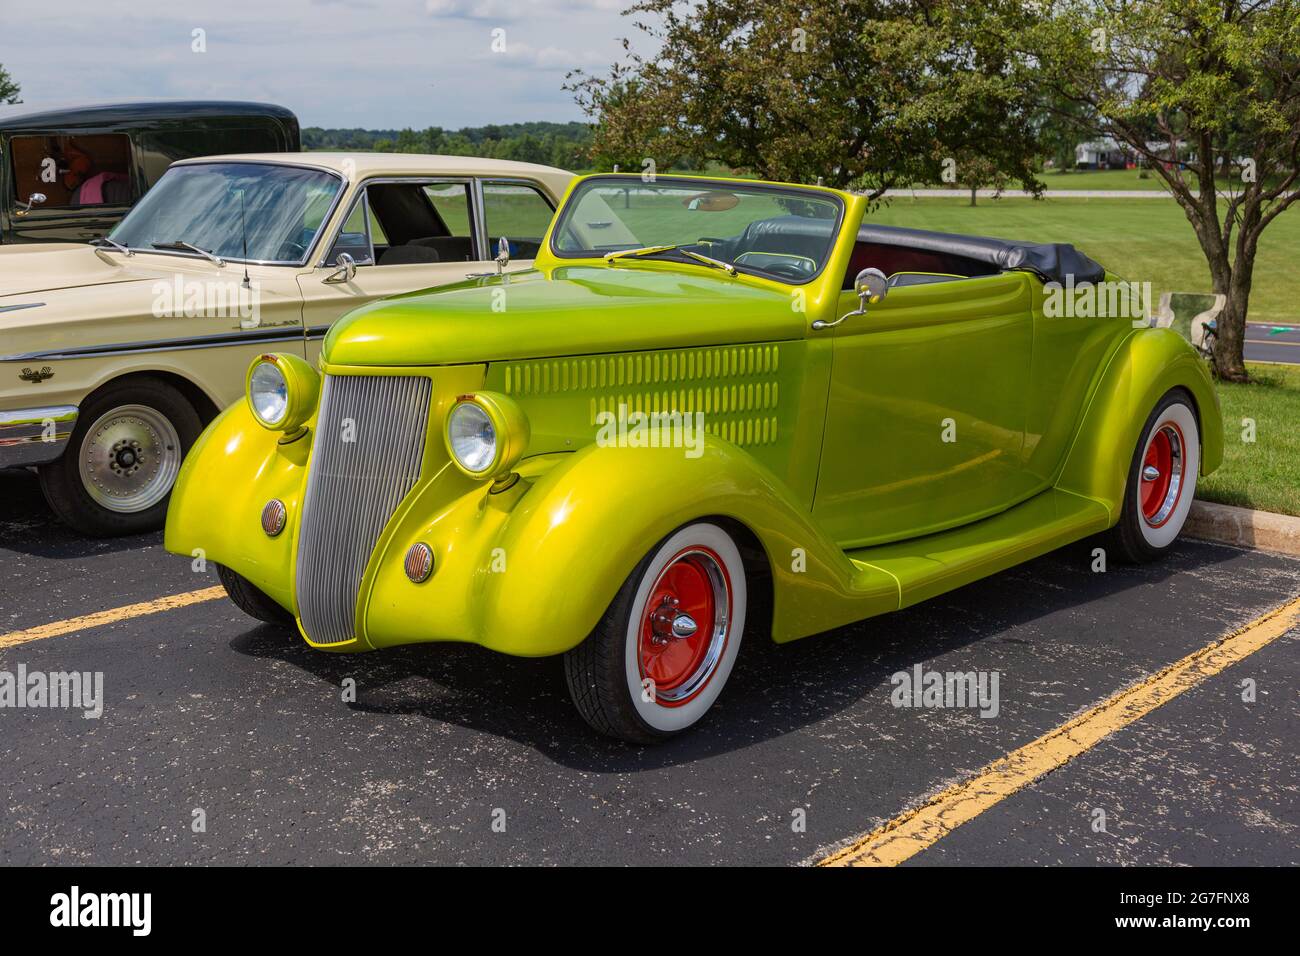 A chartreus yellow 1936 Ford Cabriolet roadster on display at a car show in Angola, Indiana, USA. Stock Photo